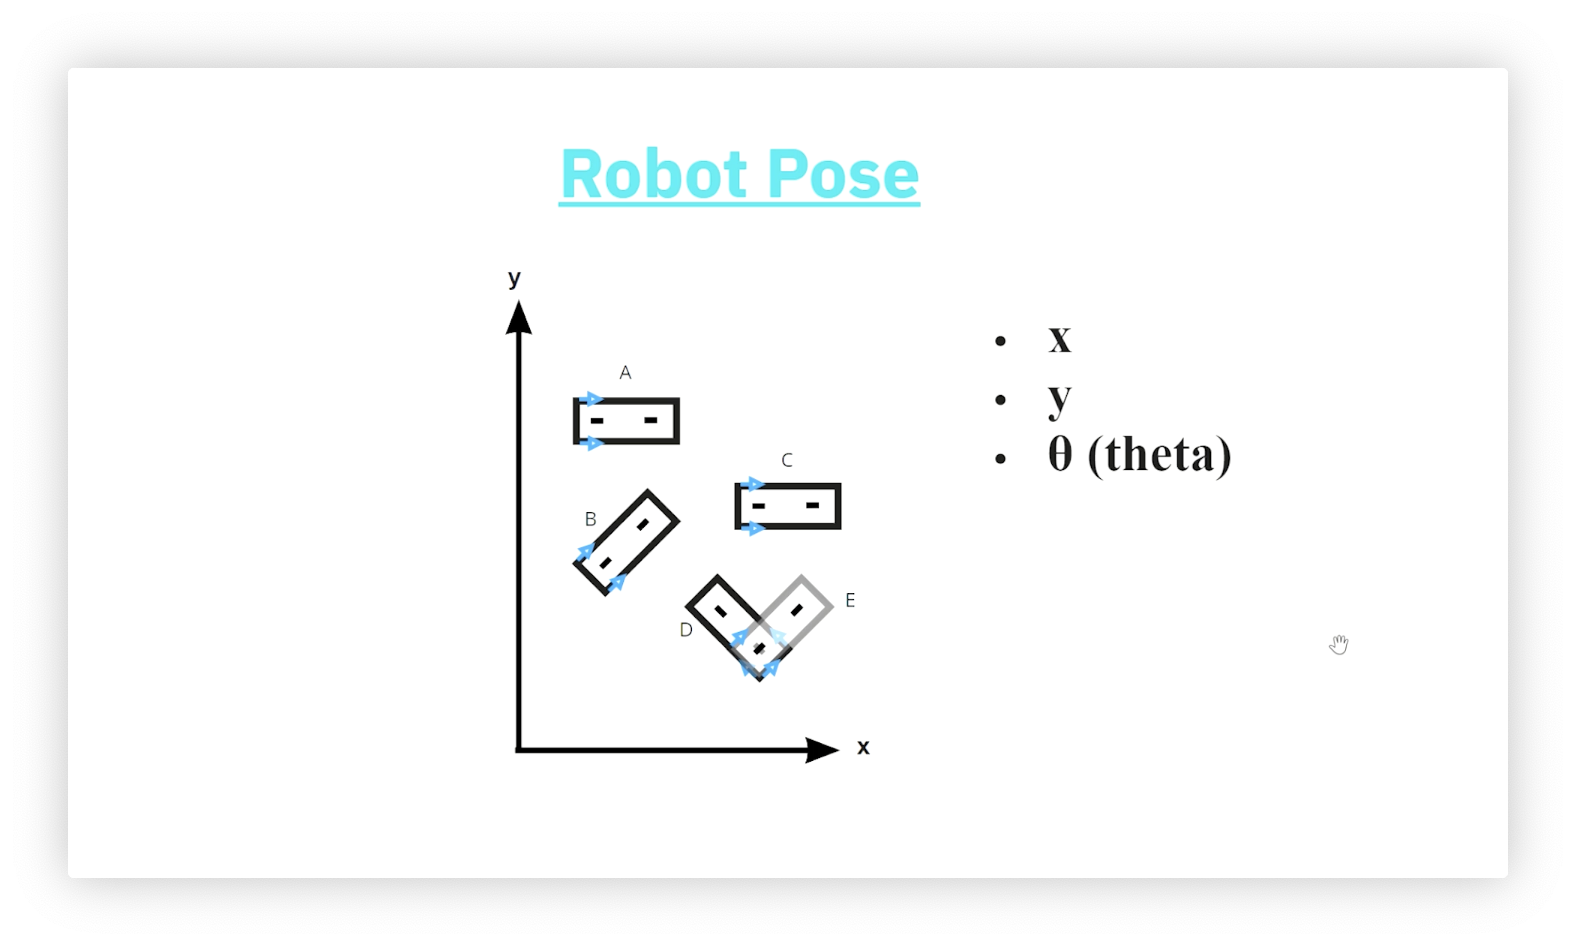 A collection of robots in the (x,y) plane with different poses.